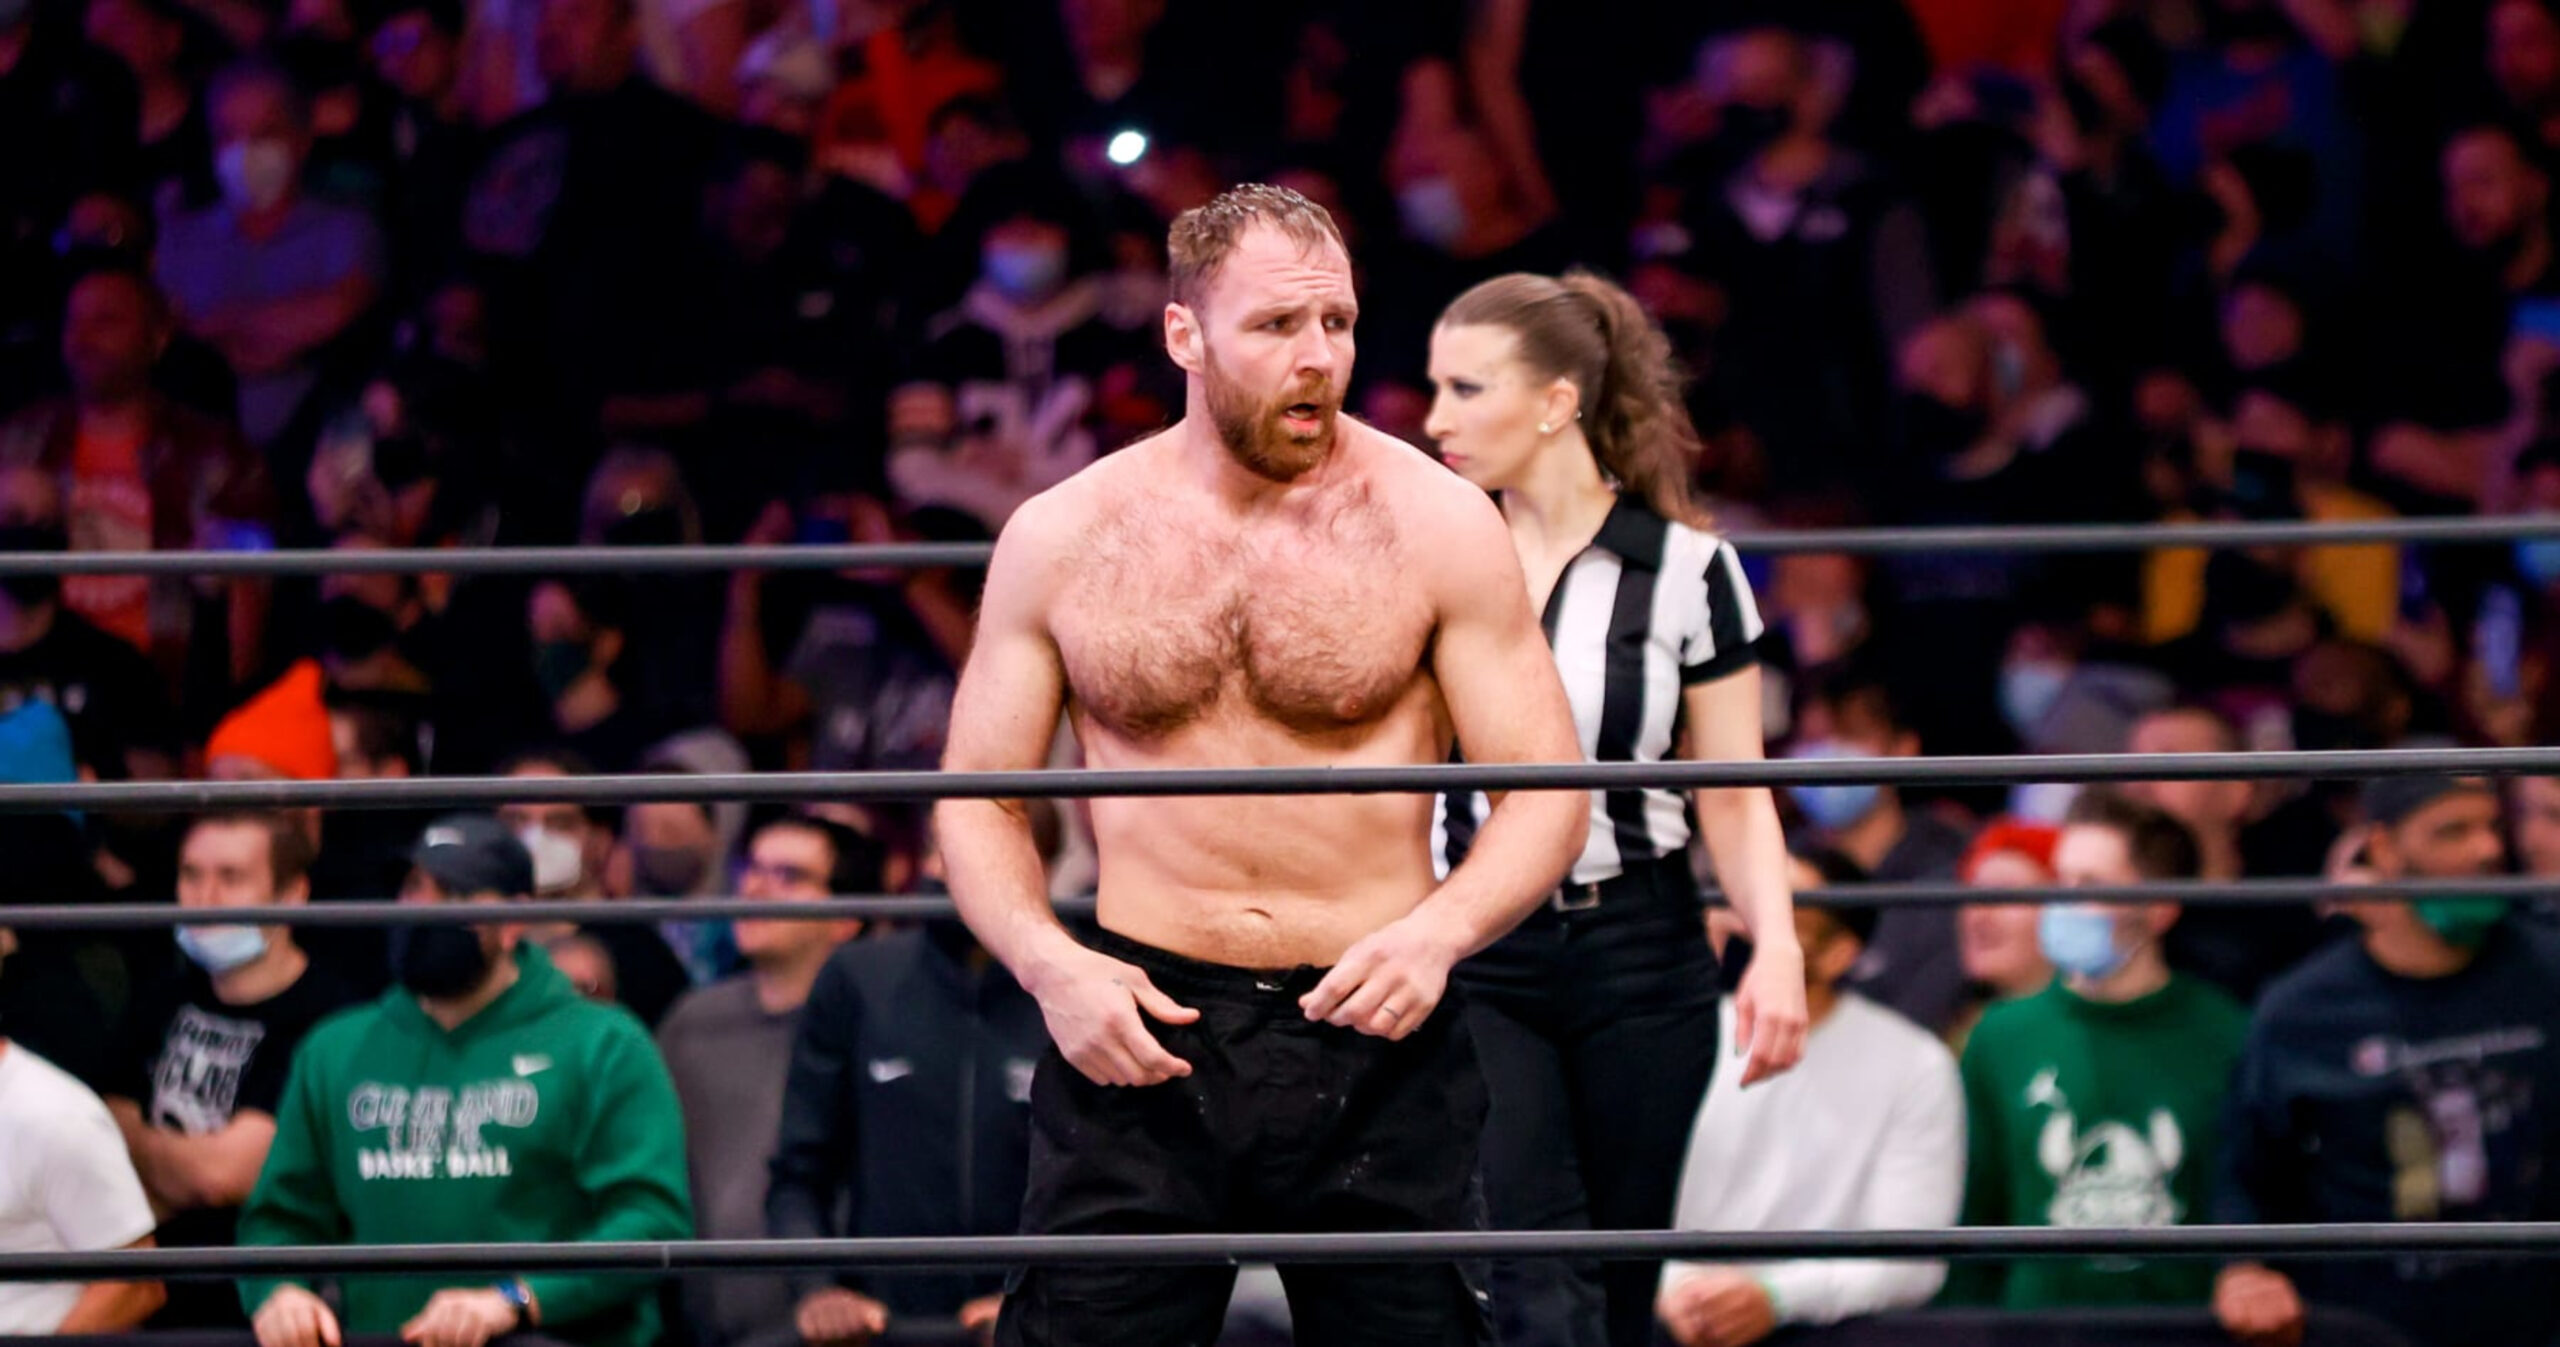 Nostalgia and Tribute: The Unbroken Legacy of Dean Ambrose in WWE's Asylum